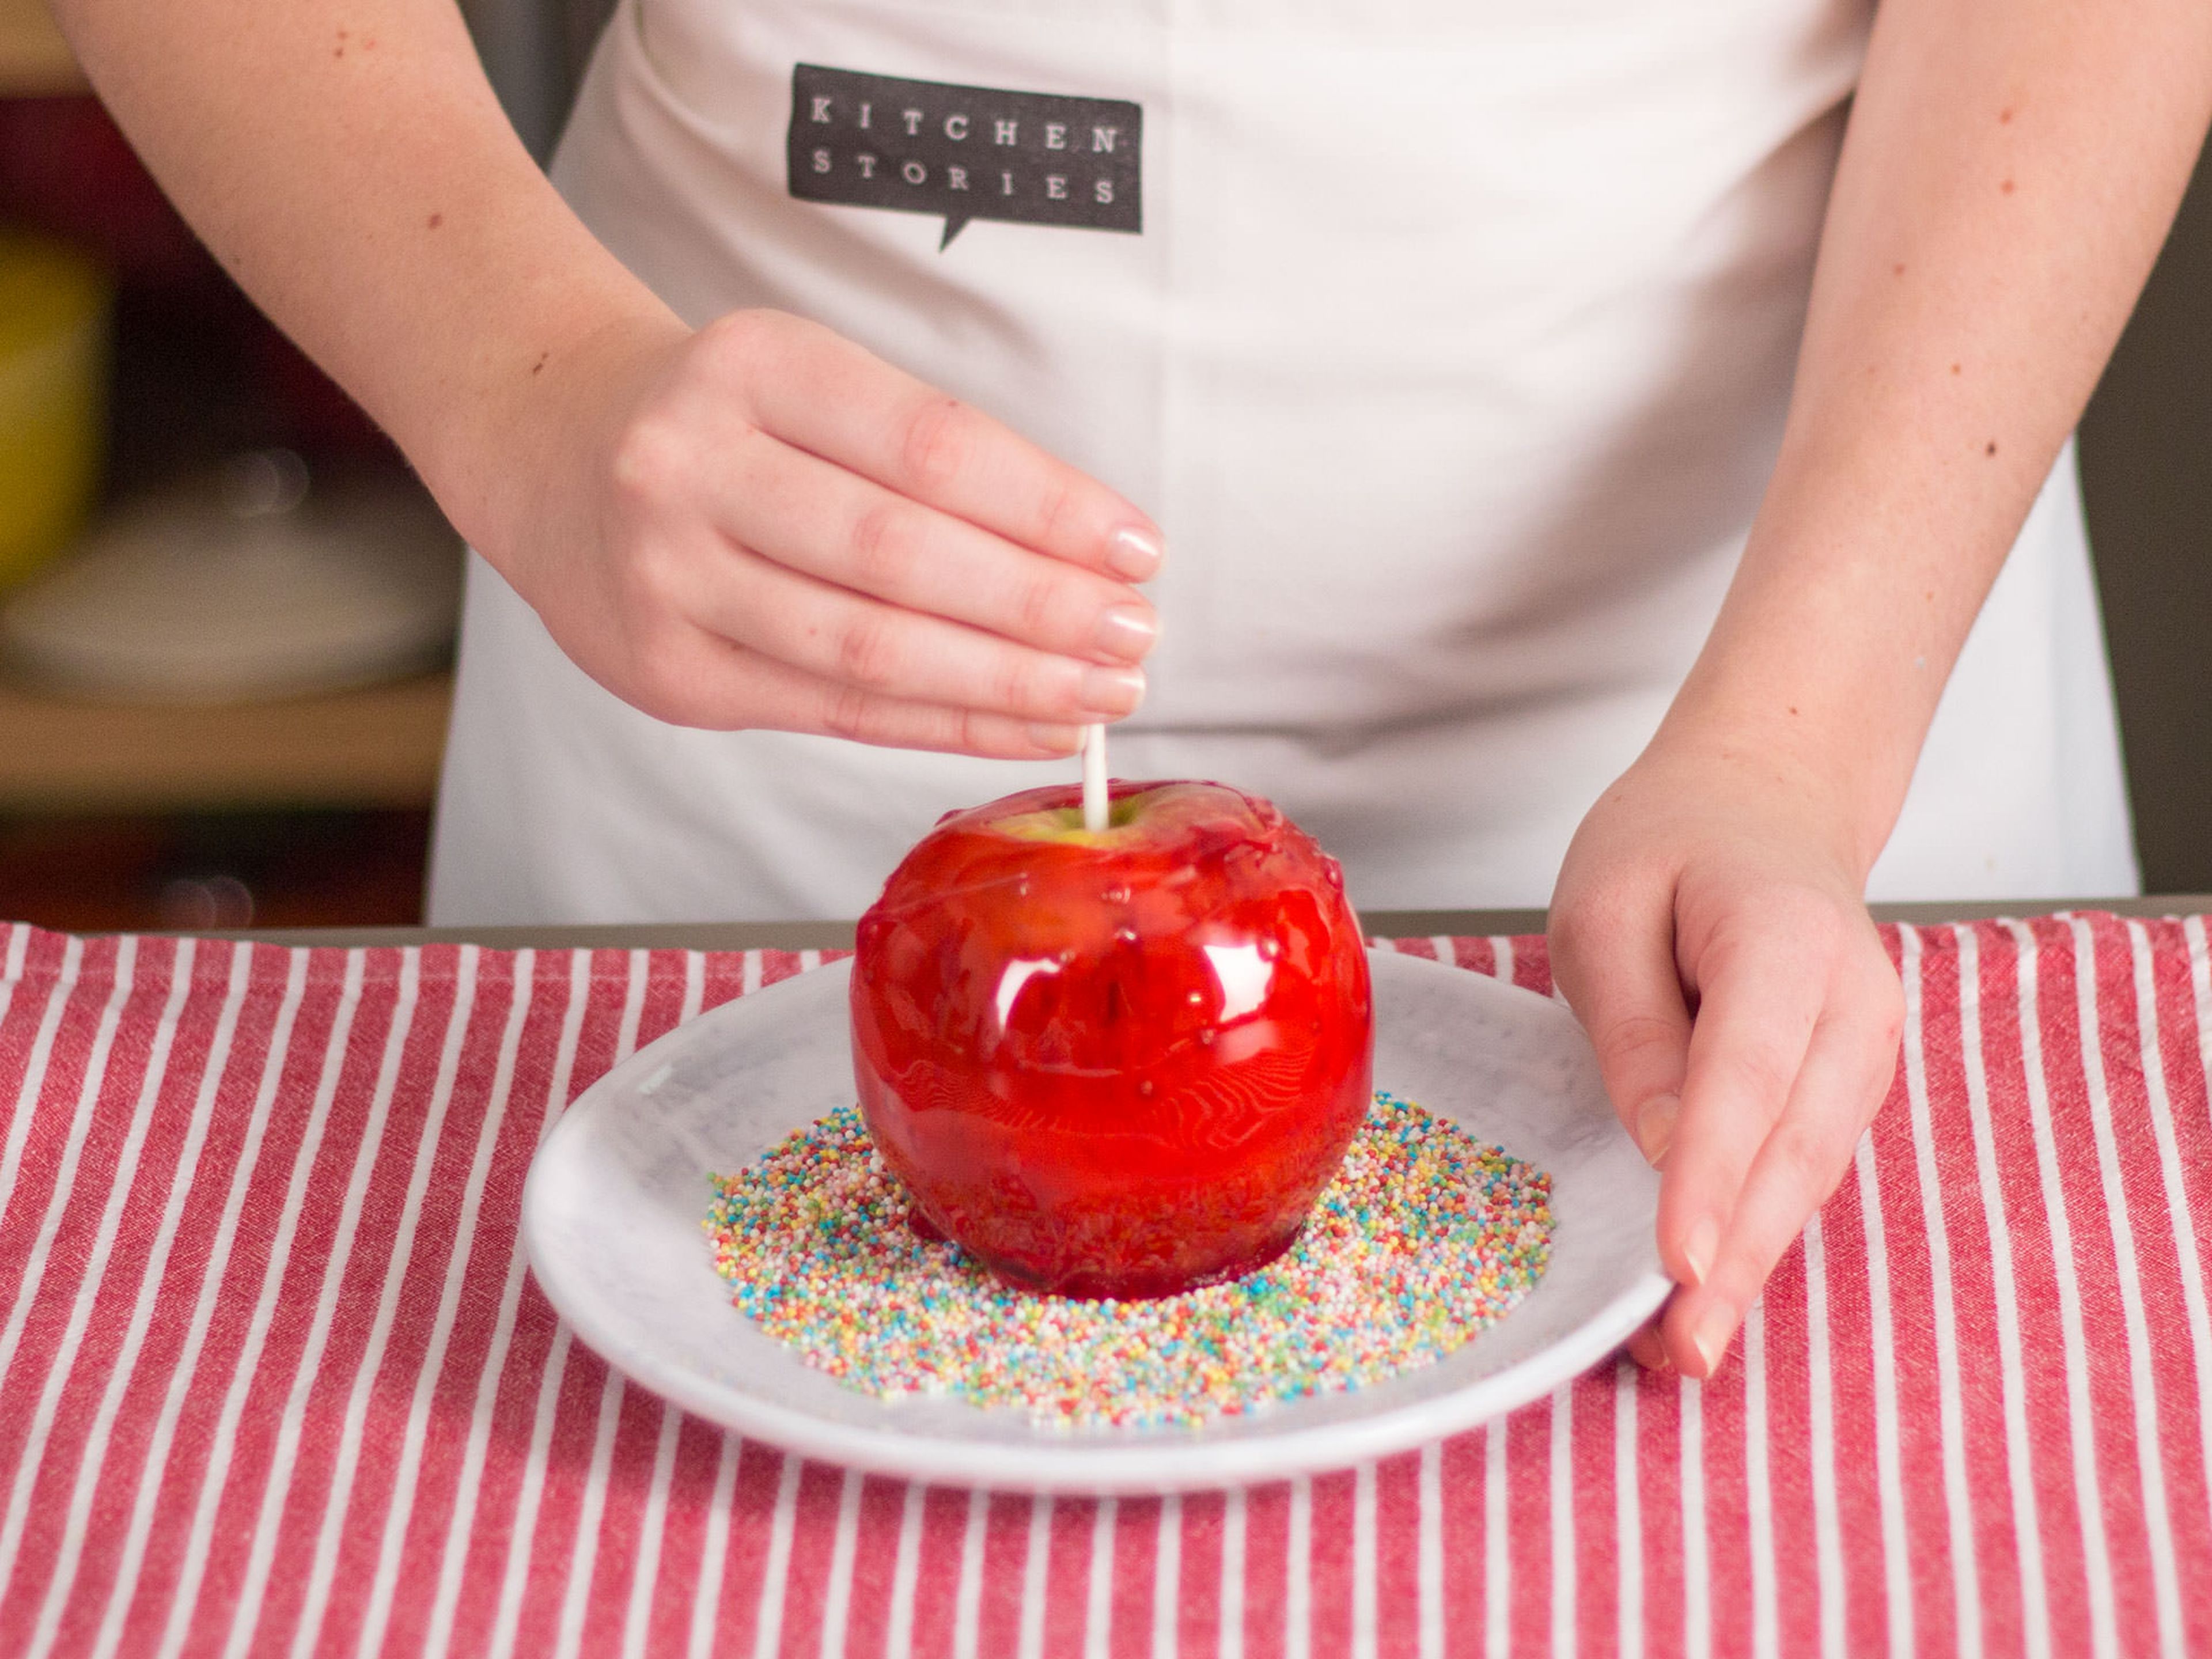 Dip apples into sprinkles, as desired. Transfer to a parchment paper-lined baking sheet and allow to cool. Enjoy!